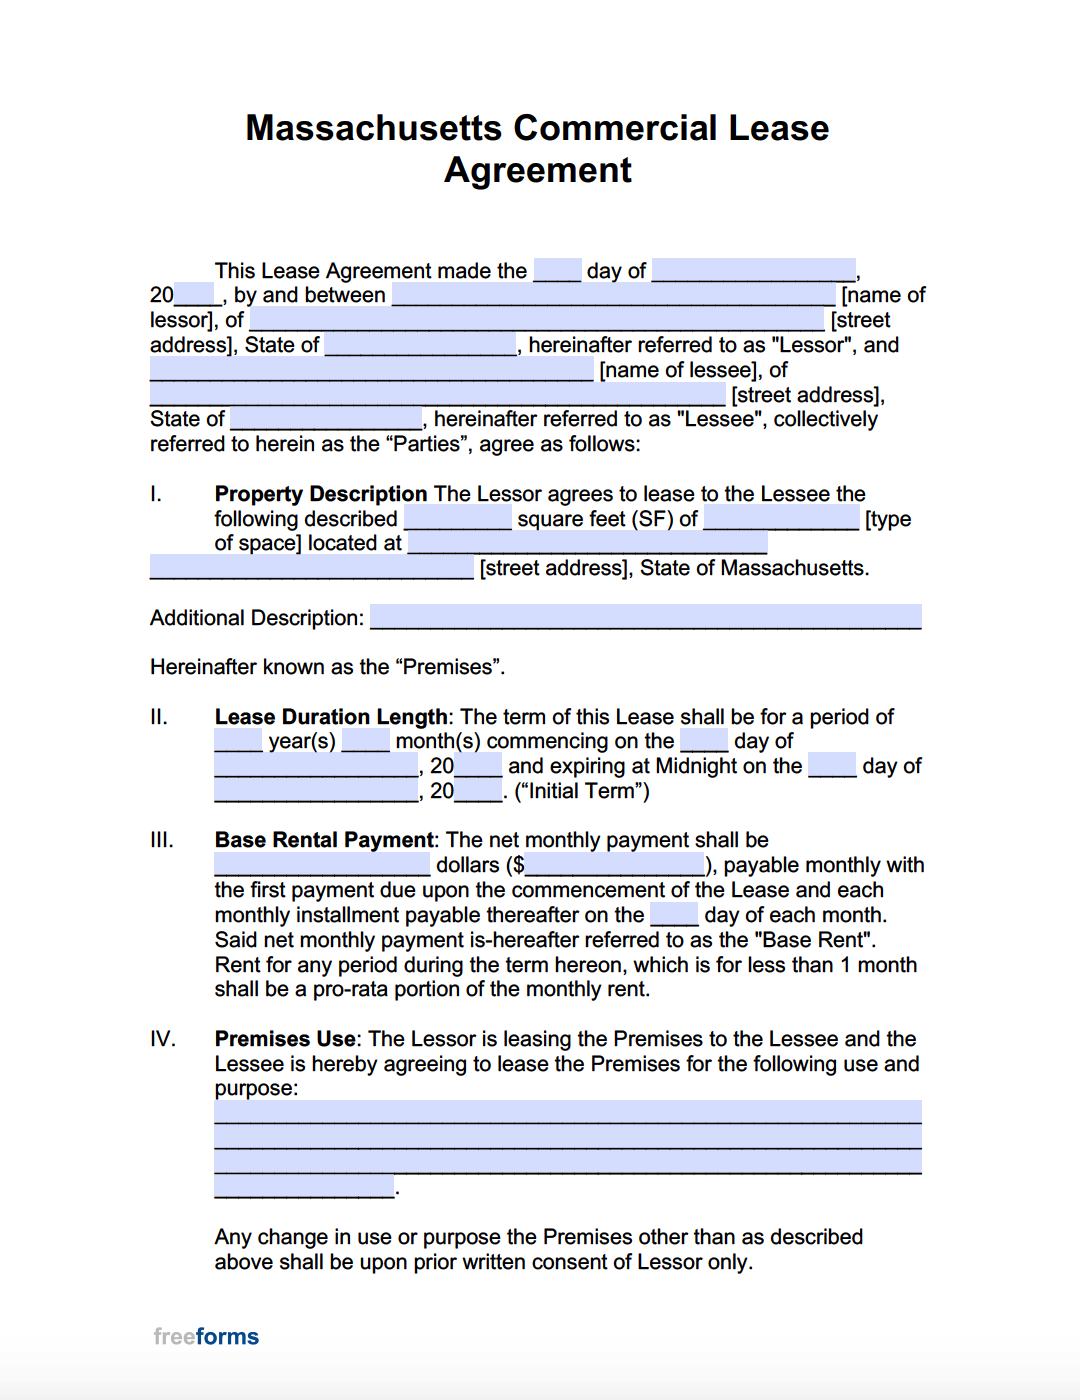 Free Massachusetts Commercial Lease Agreement Template  PDF  WORD Within commercial lease agreement template word